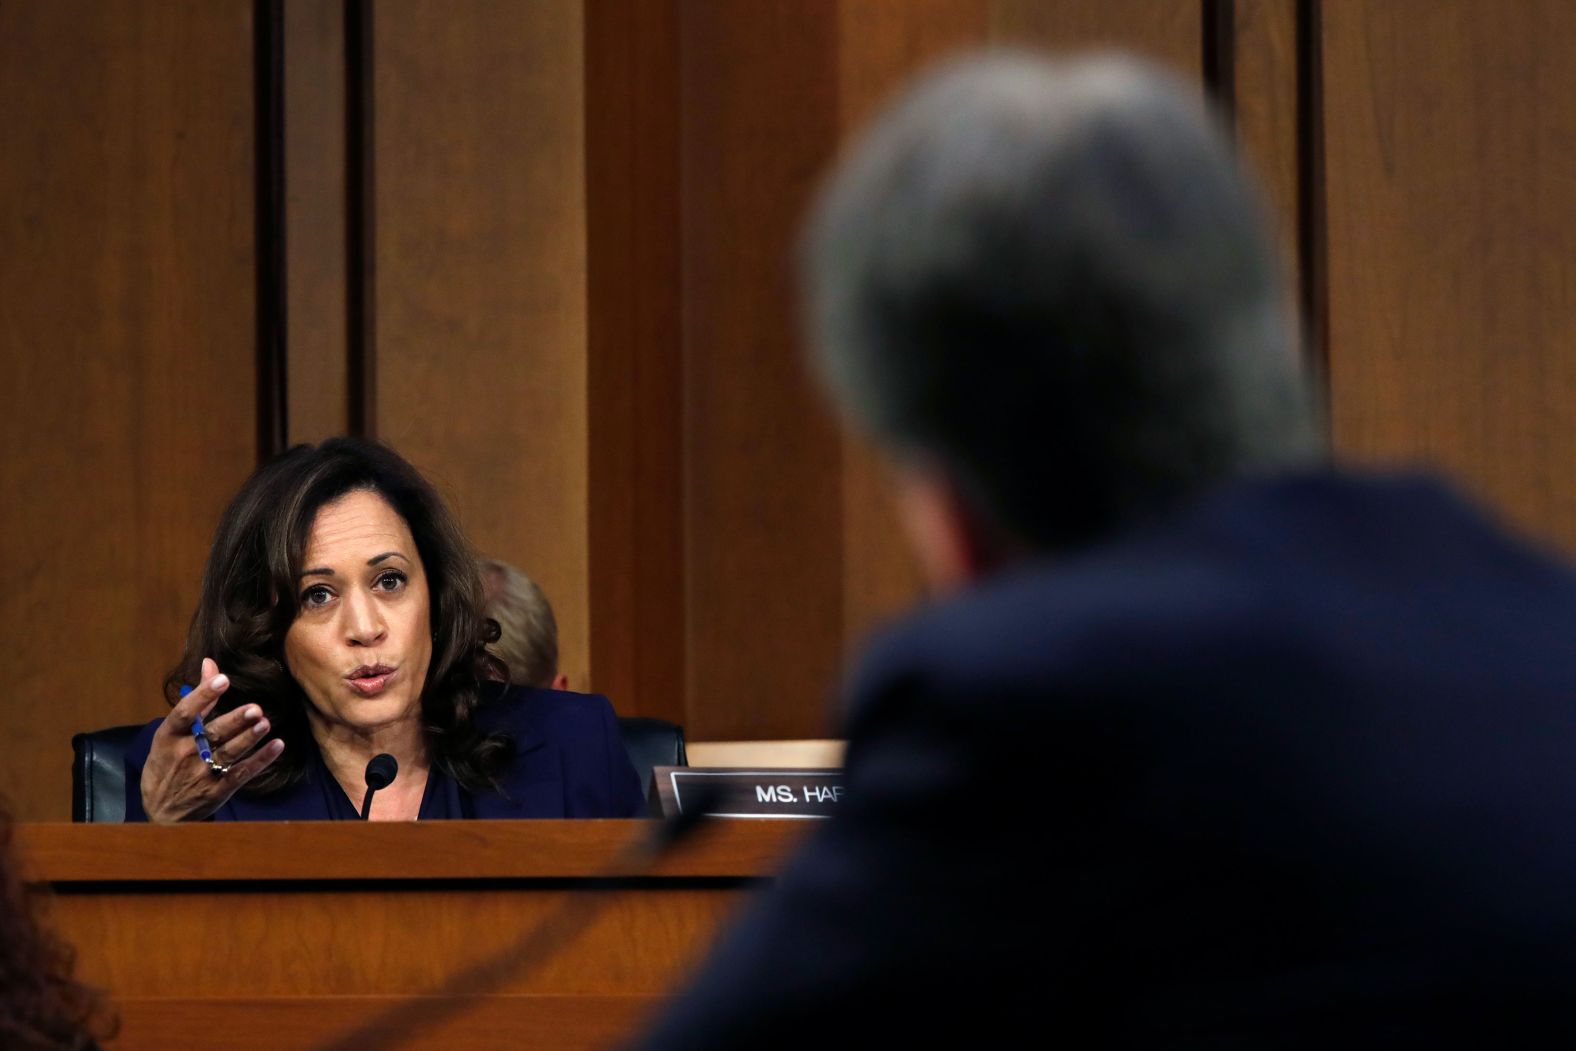 Sen. Kamala Harris questions Kavanaugh on Wednesday. <a href="https://www.cnn.com/2018/09/06/politics/kamala-harris-brett-kavanaugh-hearing/index.html" target="_blank">The Democrat pressed Kavanaugh</a> about whether he had discussed special counsel Robert Mueller's investigation with anyone. After answering "with other judges I know," Kavanaugh was asked if he had discussed the probe with anyone who works at Kasowitz Benson Torres, the New York law firm founded by President Donald Trump's personal attorney Marc Kasowitz. Kavanaugh replied that he's unsure he knows everyone who works at that law firm and asked the senator if there was a specific person she was talking about.